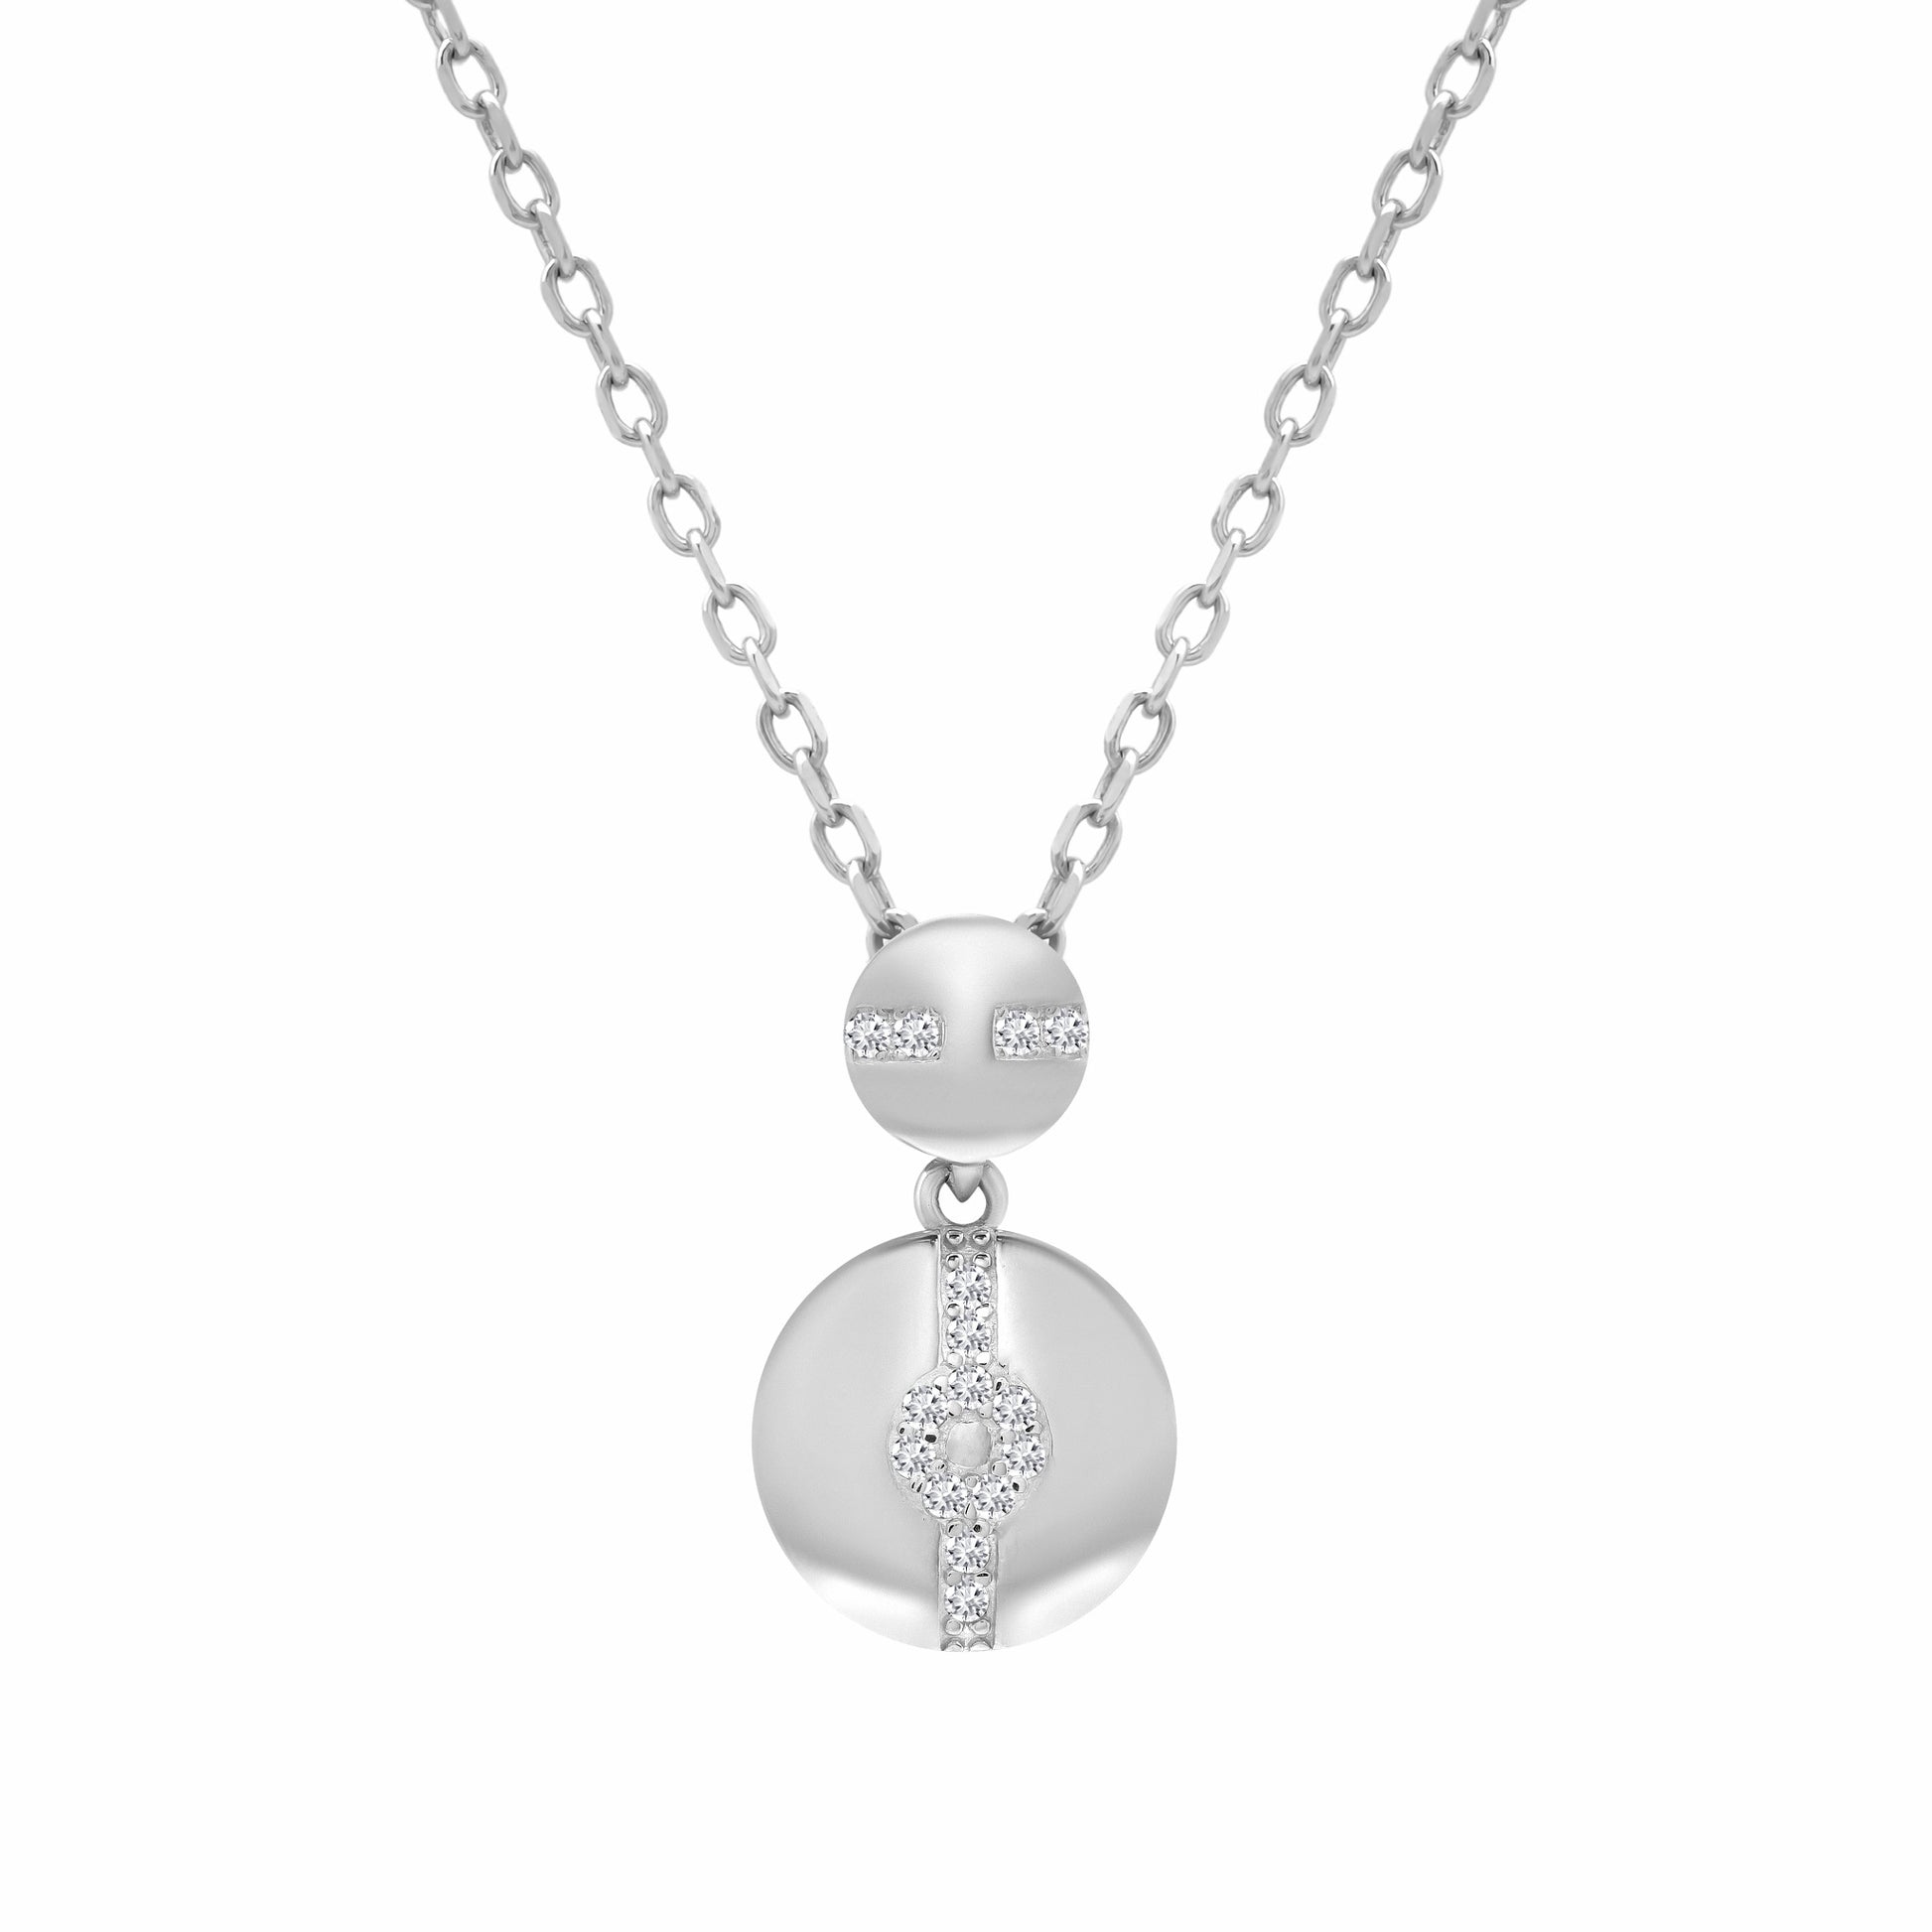 Hypnotic Solar Silver Necklace on white background